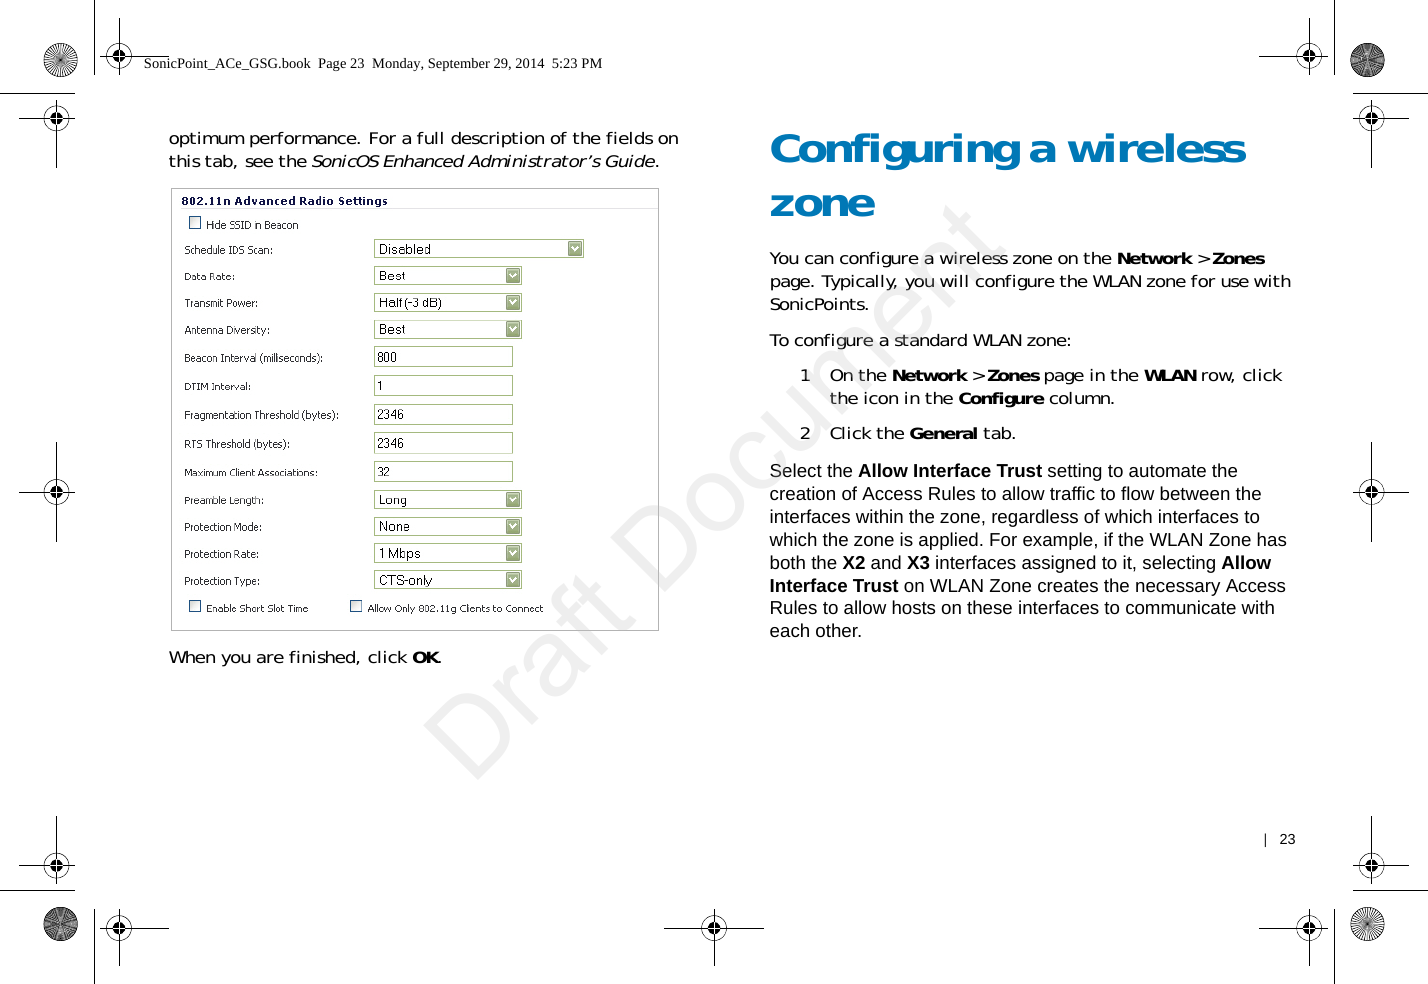    |   23optimum performance. For a full description of the fields on this tab, see the SonicOS Enhanced Administrator’s Guide.When you are finished, click OK.Configuring a wireless zone You can configure a wireless zone on the Network &gt; Zones page. Typically, you will configure the WLAN zone for use with SonicPoints. To configure a standard WLAN zone: 1On the Network &gt; Zones page in the WLAN row, click the icon in the Configure column.2Click the General tab.Select the Allow Interface Trust setting to automate the creation of Access Rules to allow traffic to flow between the interfaces within the zone, regardless of which interfaces to which the zone is applied. For example, if the WLAN Zone has both the X2 and X3 interfaces assigned to it, selecting Allow Interface Trust on WLAN Zone creates the necessary Access Rules to allow hosts on these interfaces to communicate with each other.SonicPoint_ACe_GSG.book  Page 23  Monday, September 29, 2014  5:23 PMDraft Document